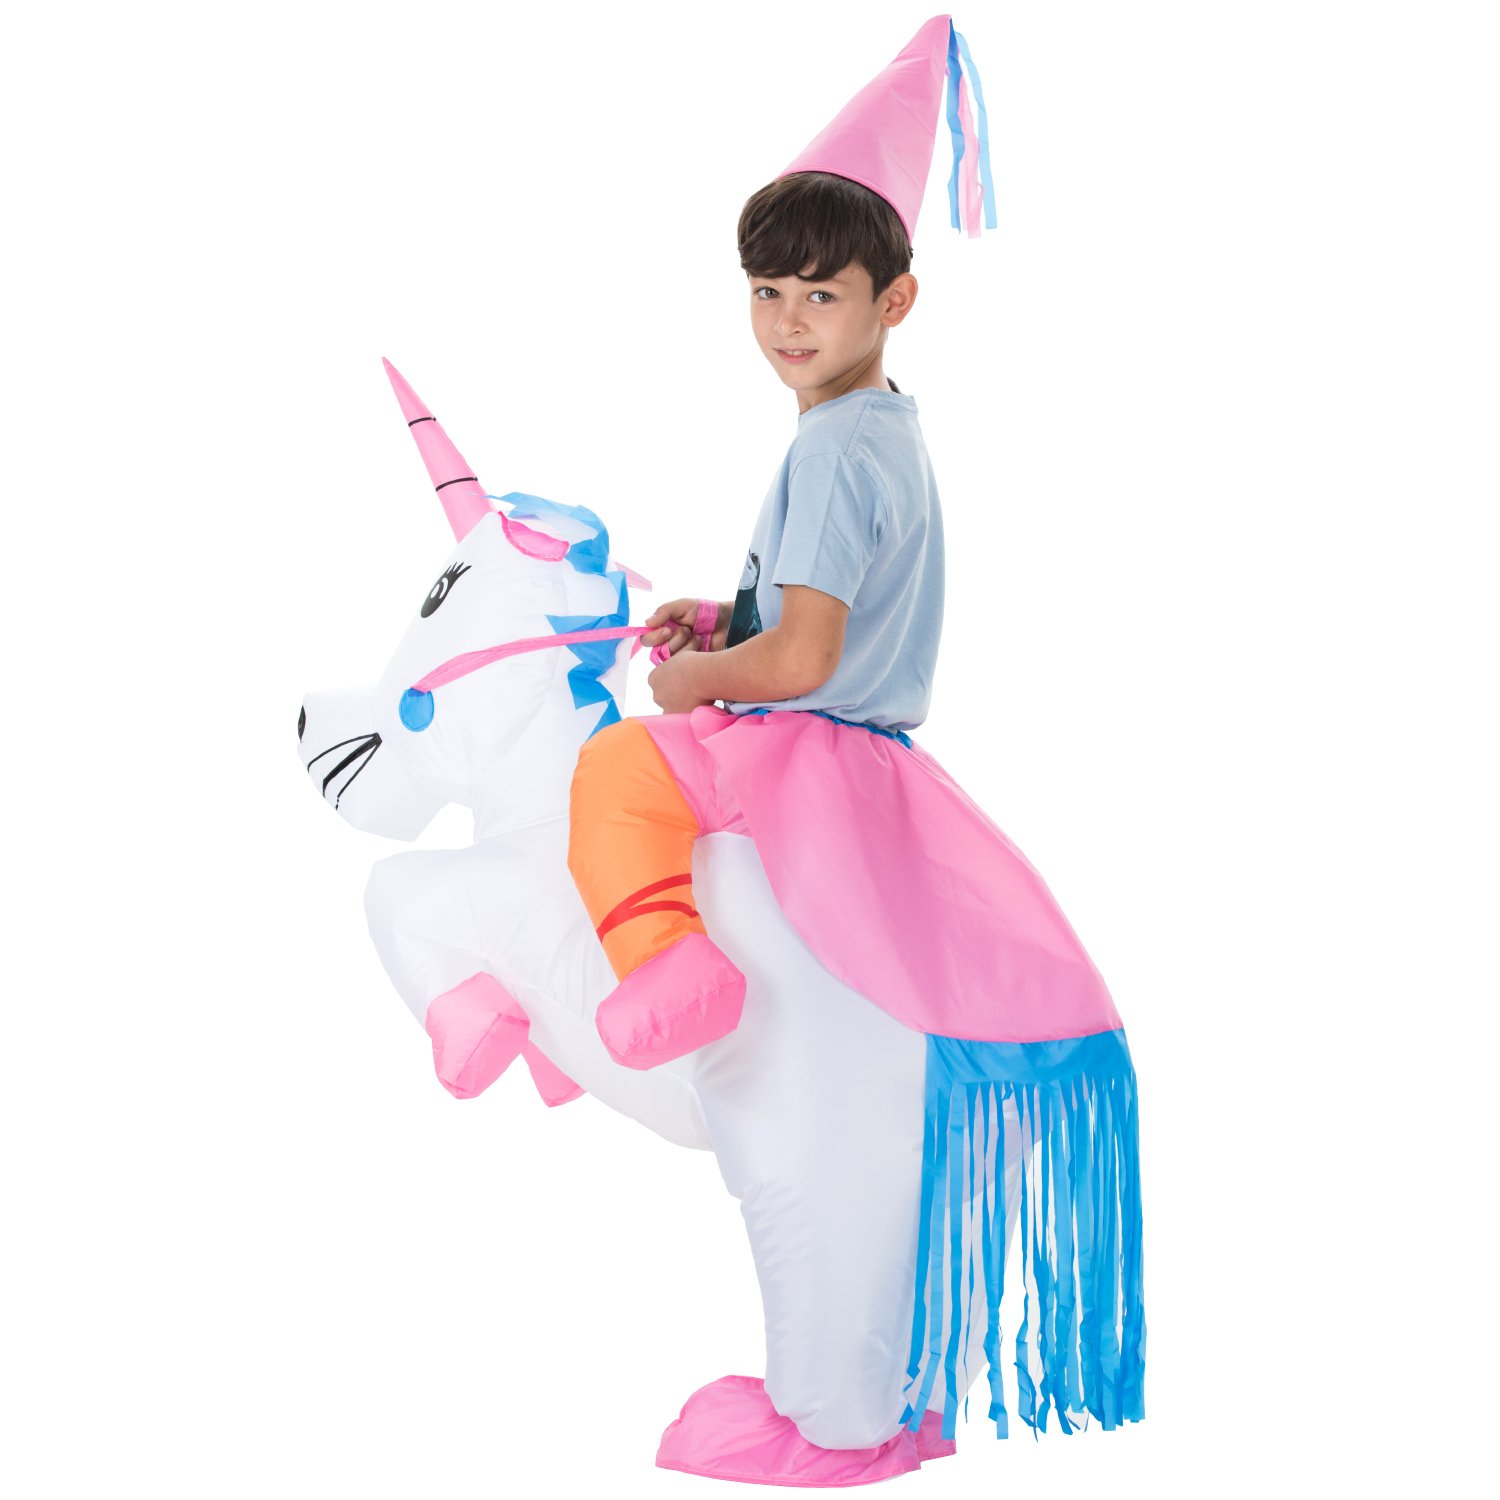 TOLOCO Inflatable Costume, Blow up Costume, Inflatable Unicorn Costume for Adult Kids